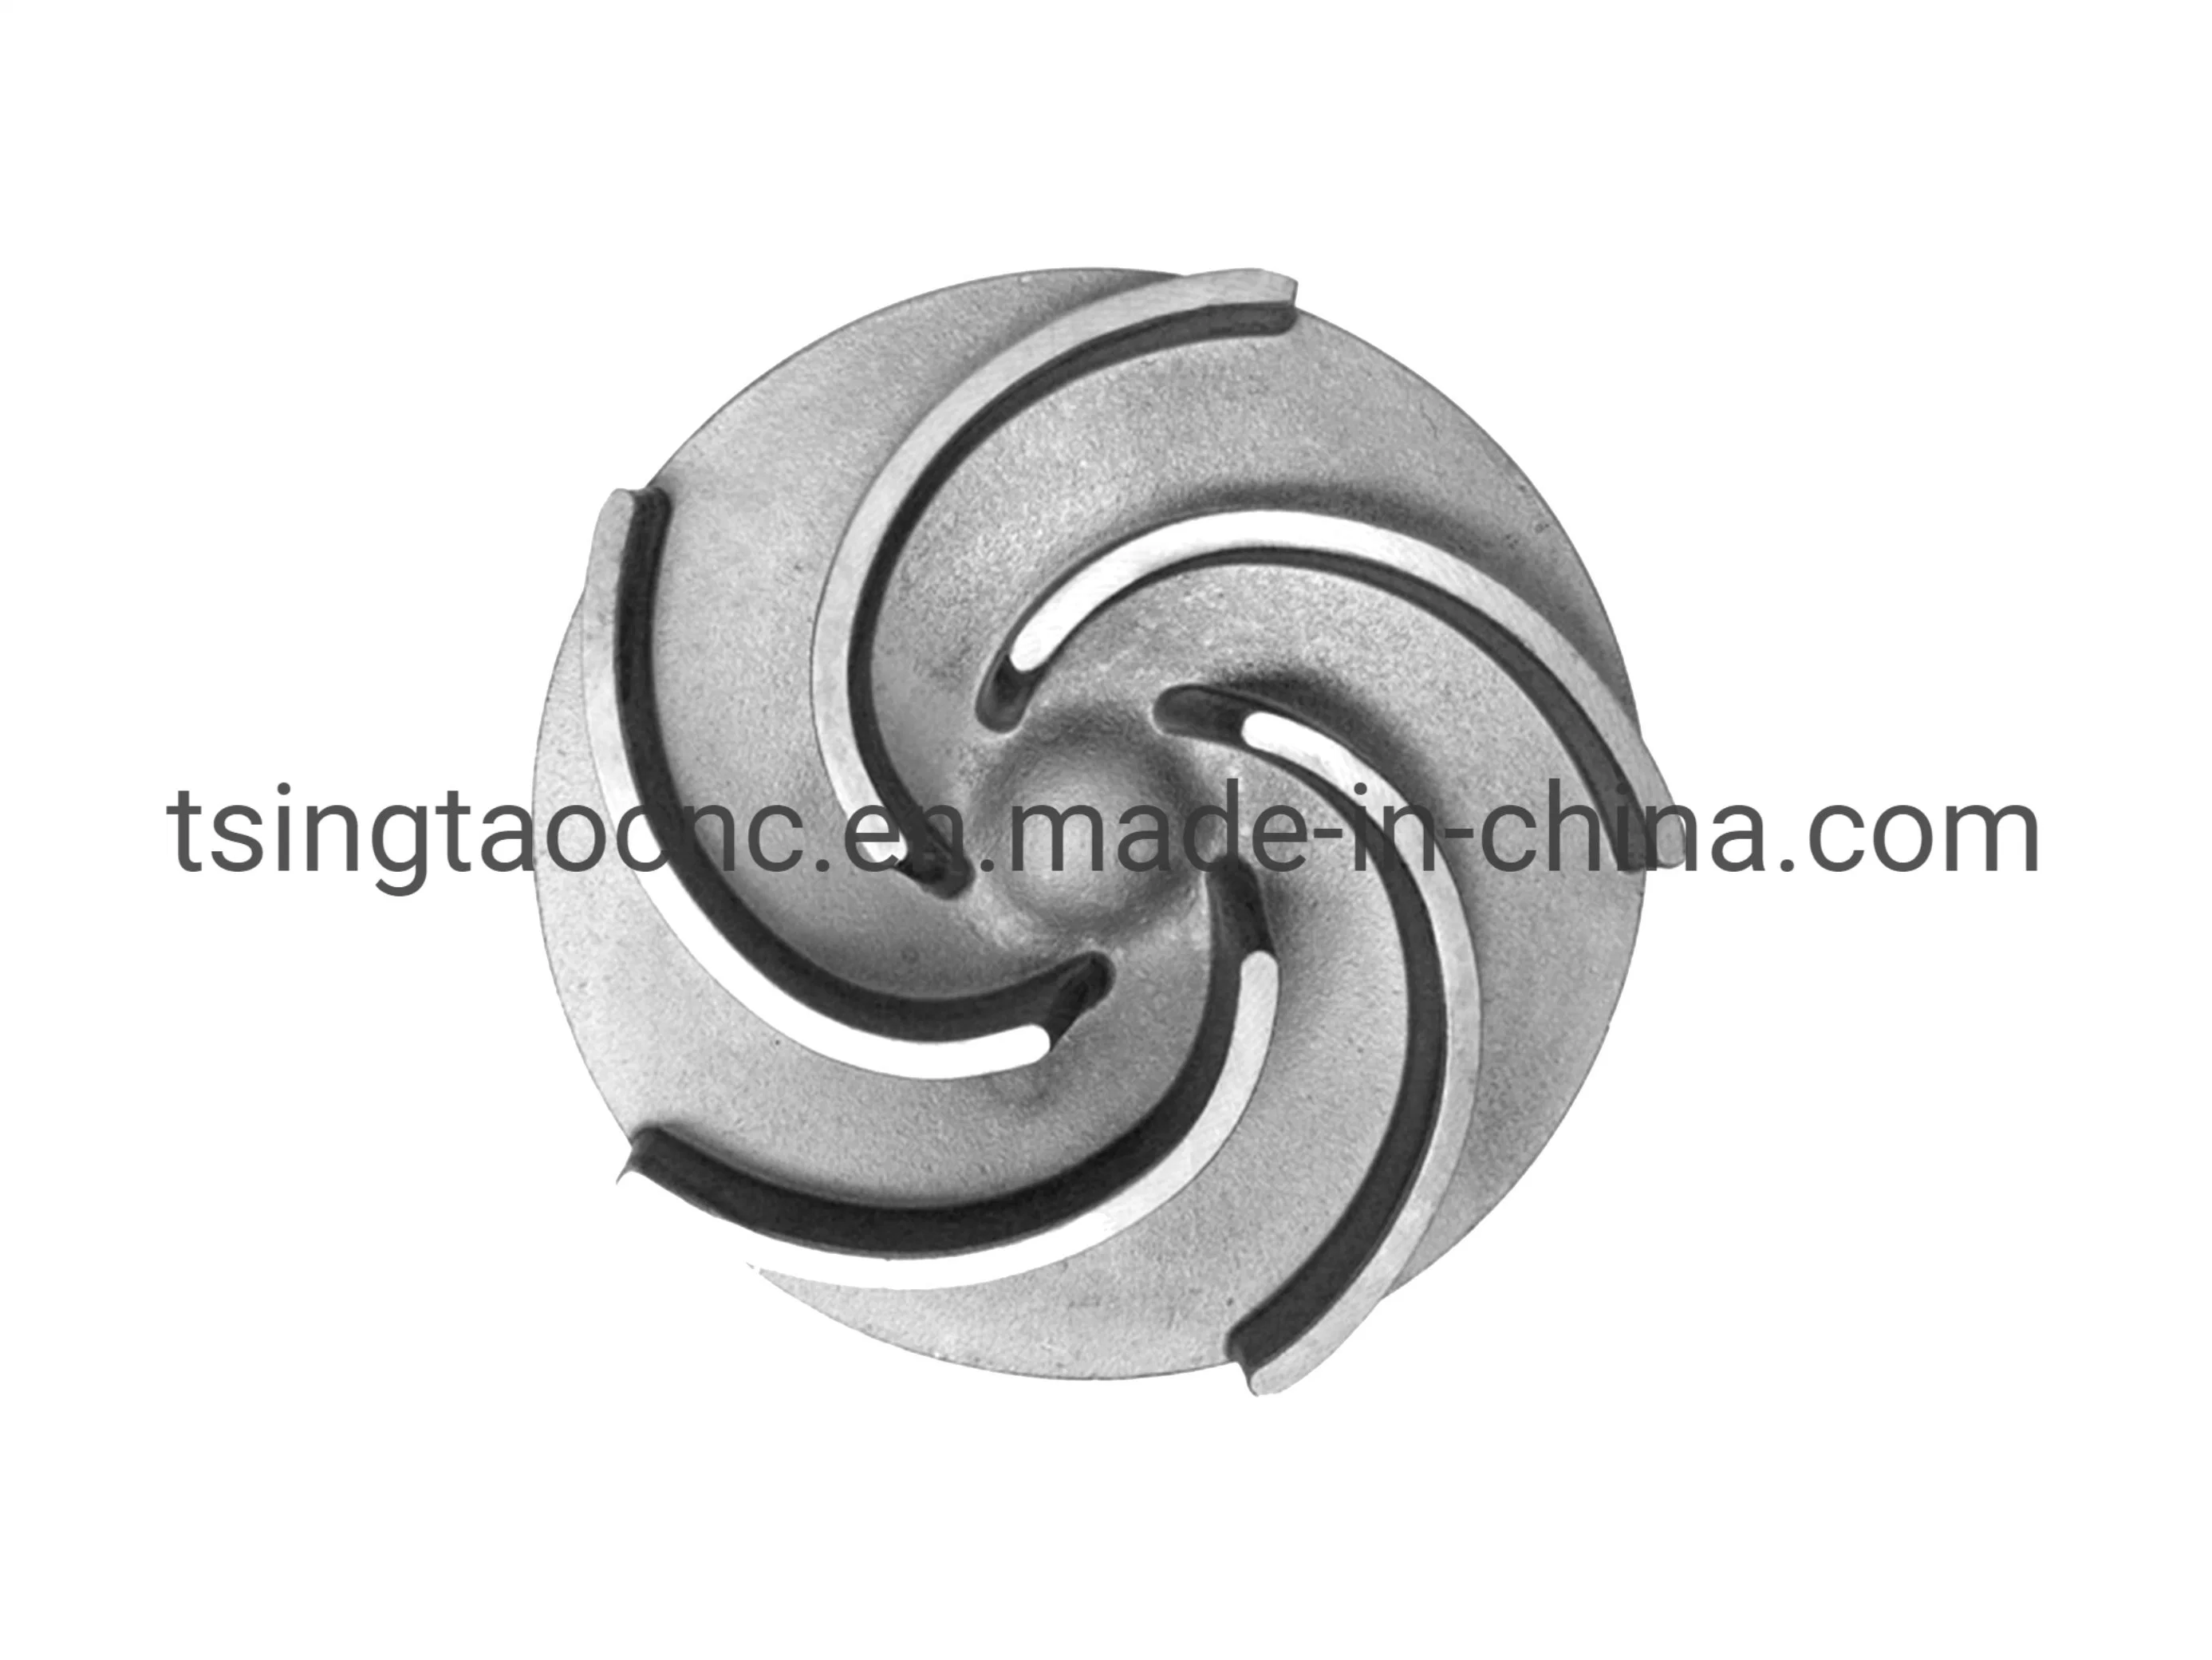 Investment Casting Stainless Steel 310 Gas Turbine Blade